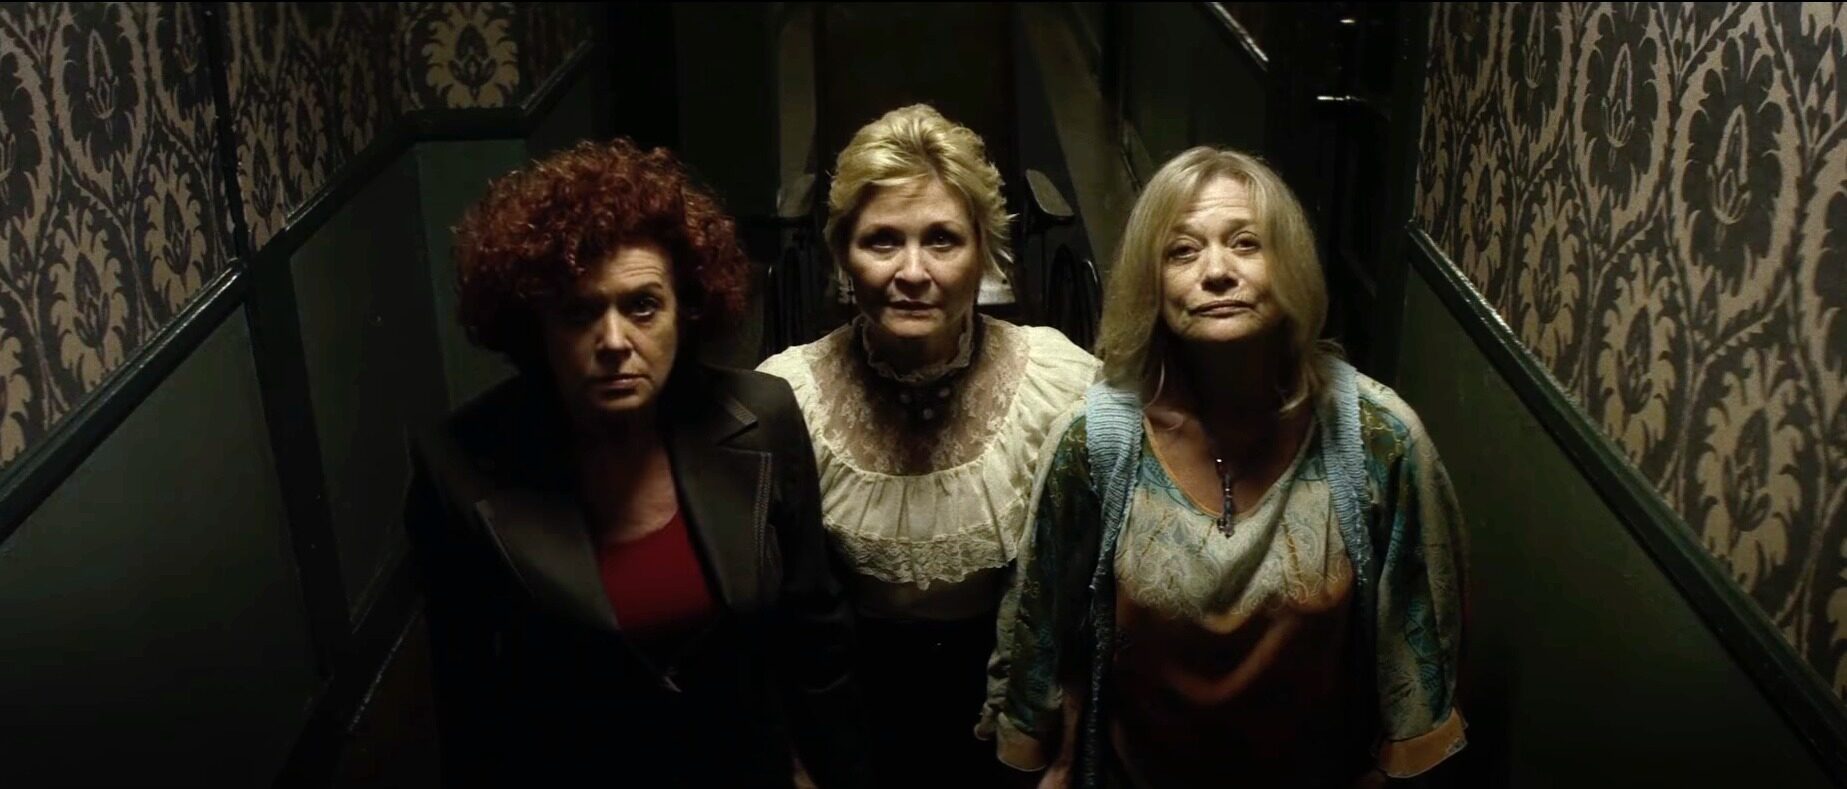 Meg Foster as Margaret Morgan Patricia Quinn as Megan Dee Wallace as Sonny in The Lords of Salem